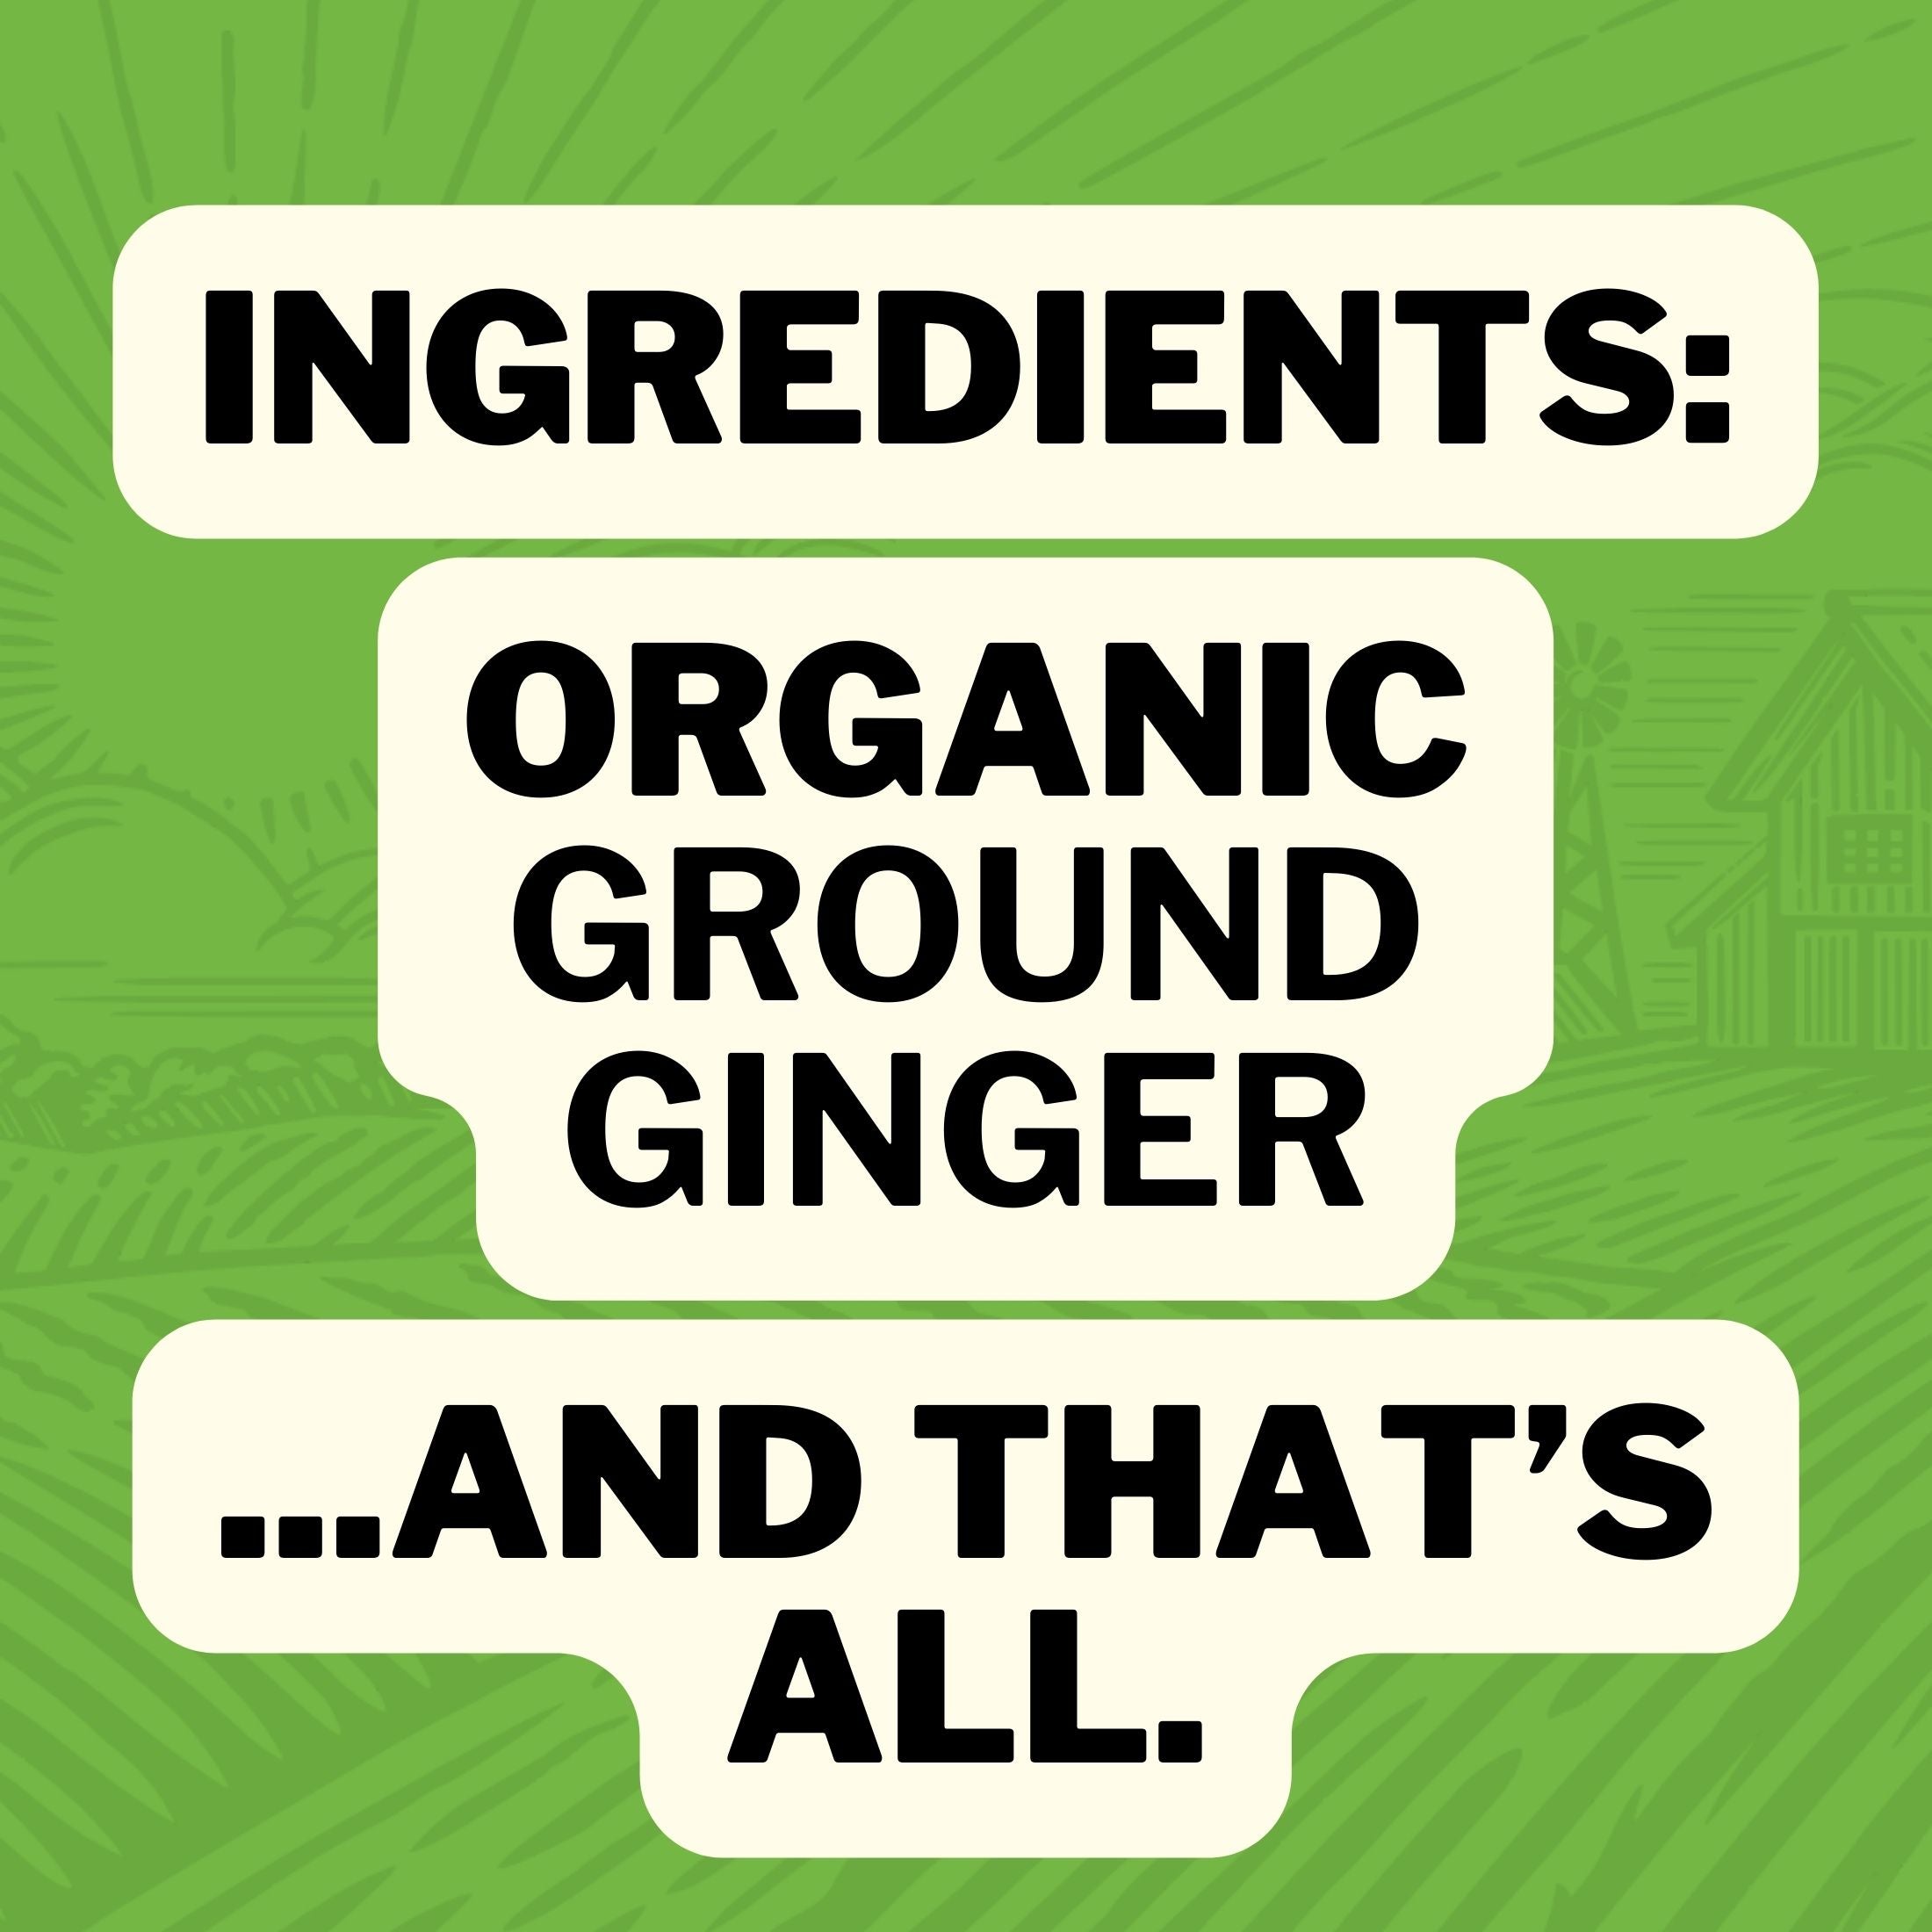 Ingredients: Organic Ground Ginger... and that's all.